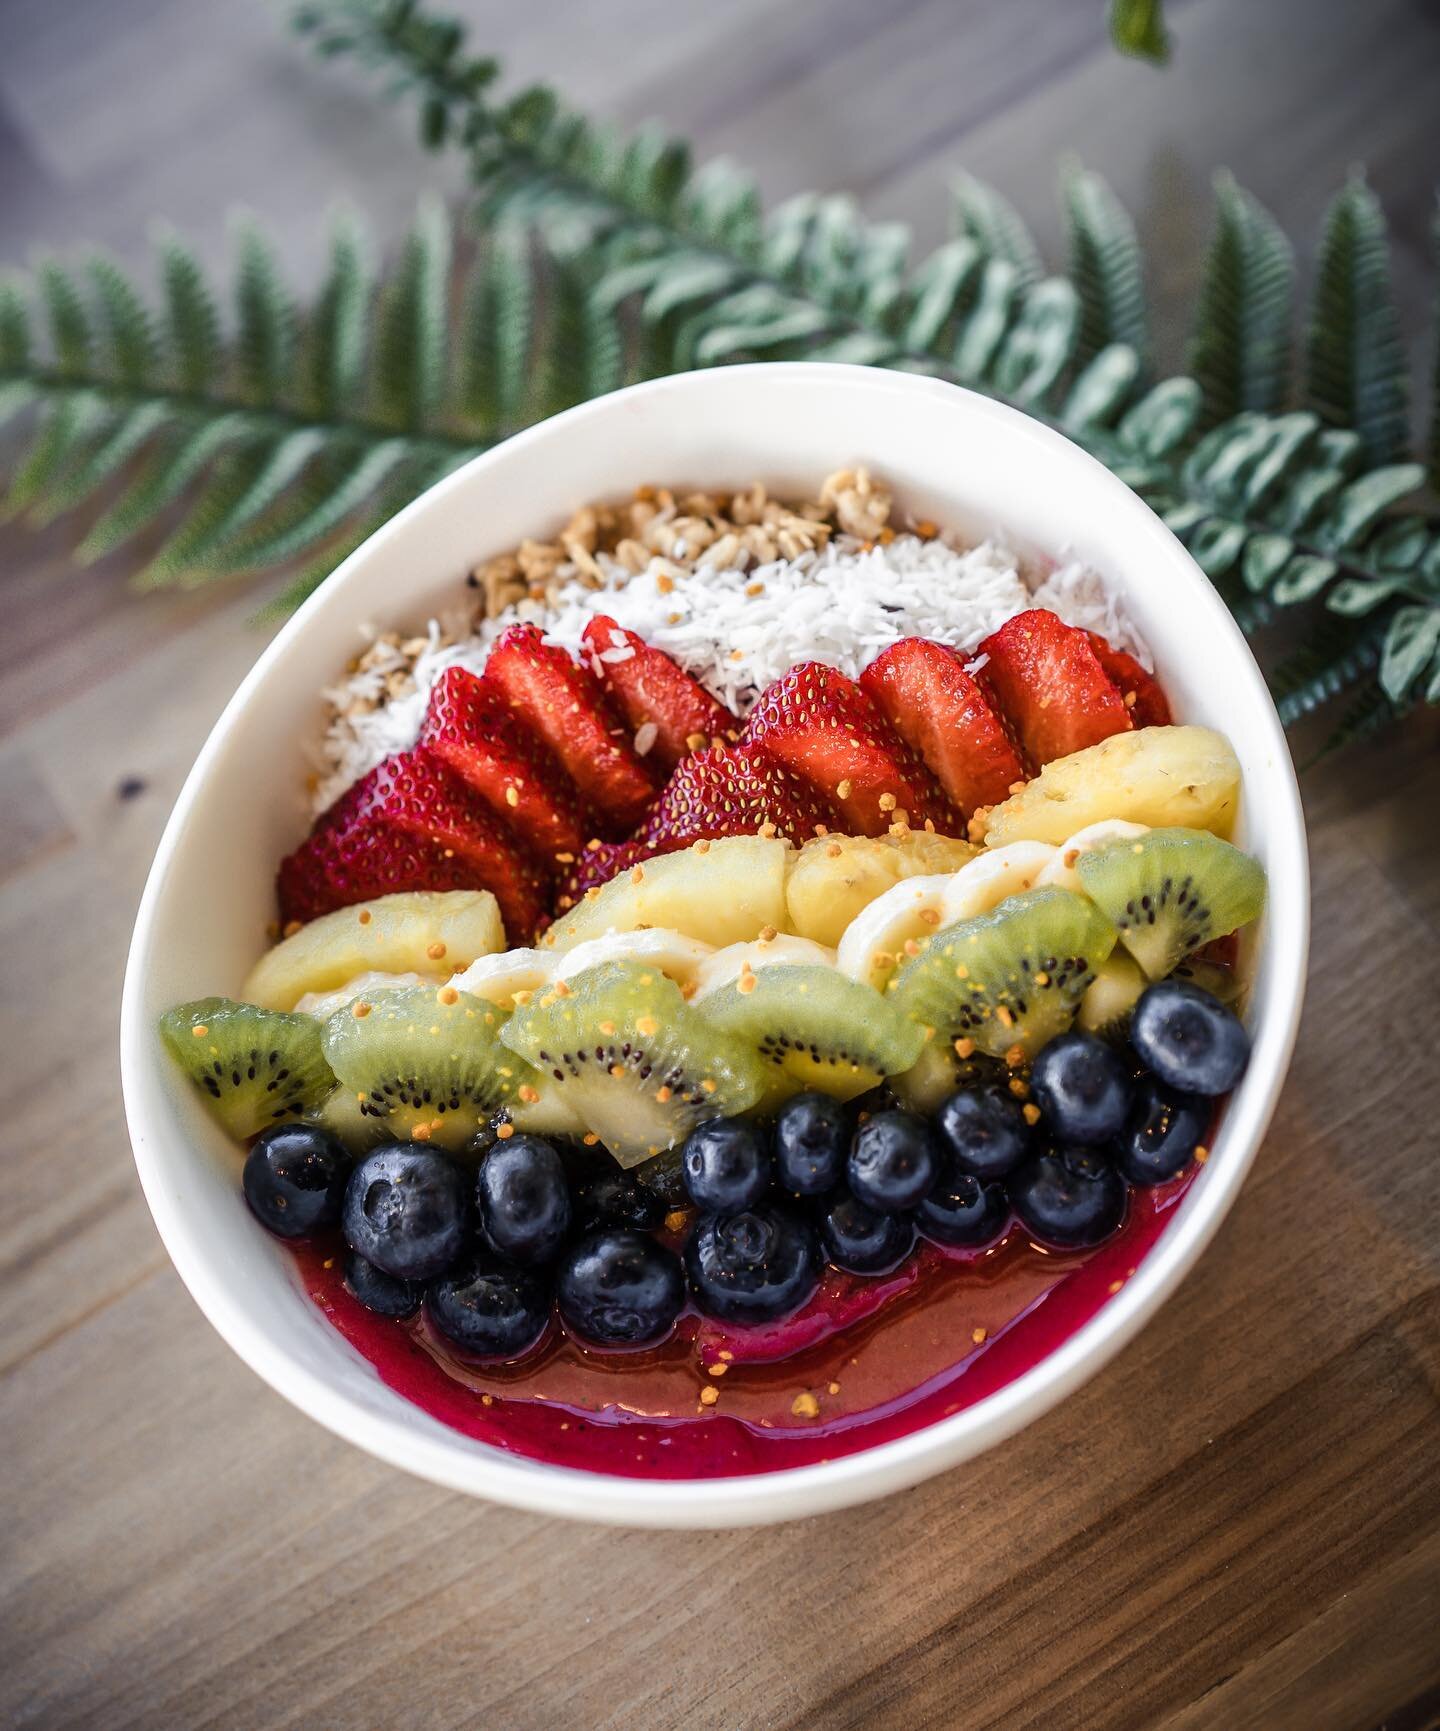 Some color to brighten up your feed on this gloomy day 🌧 Happy Monday! 
.
.
.
.
.
#superfoodbowl #wellness #smoothiebowl #acaibowl #alaska